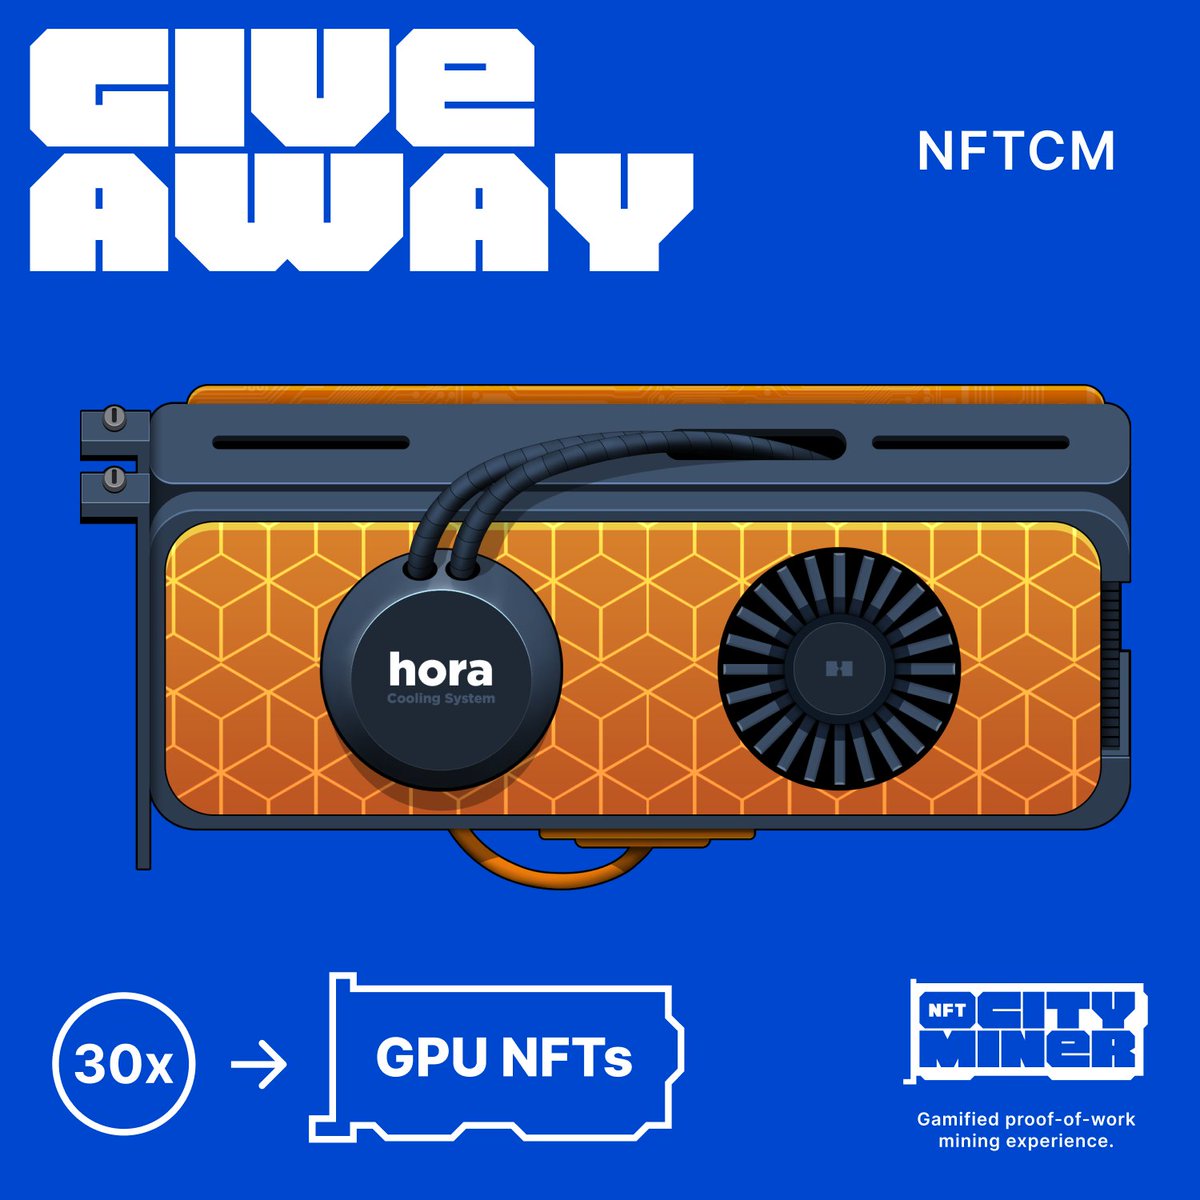 🎁 GIVEAWAY! 🎁

🟧 We are giving away 30 special NFT GPUs skinned in Ordinals style!
🍀 10 lucky winners!

Here’s how to enter:
1️⃣ Follow us
2️⃣ Like & RT
3️⃣ Comment your thoughts on Bitcoin Ordinals

⏰ Entries open for 48 hours

Don’t miss a new opportunity to join The City! 🌆